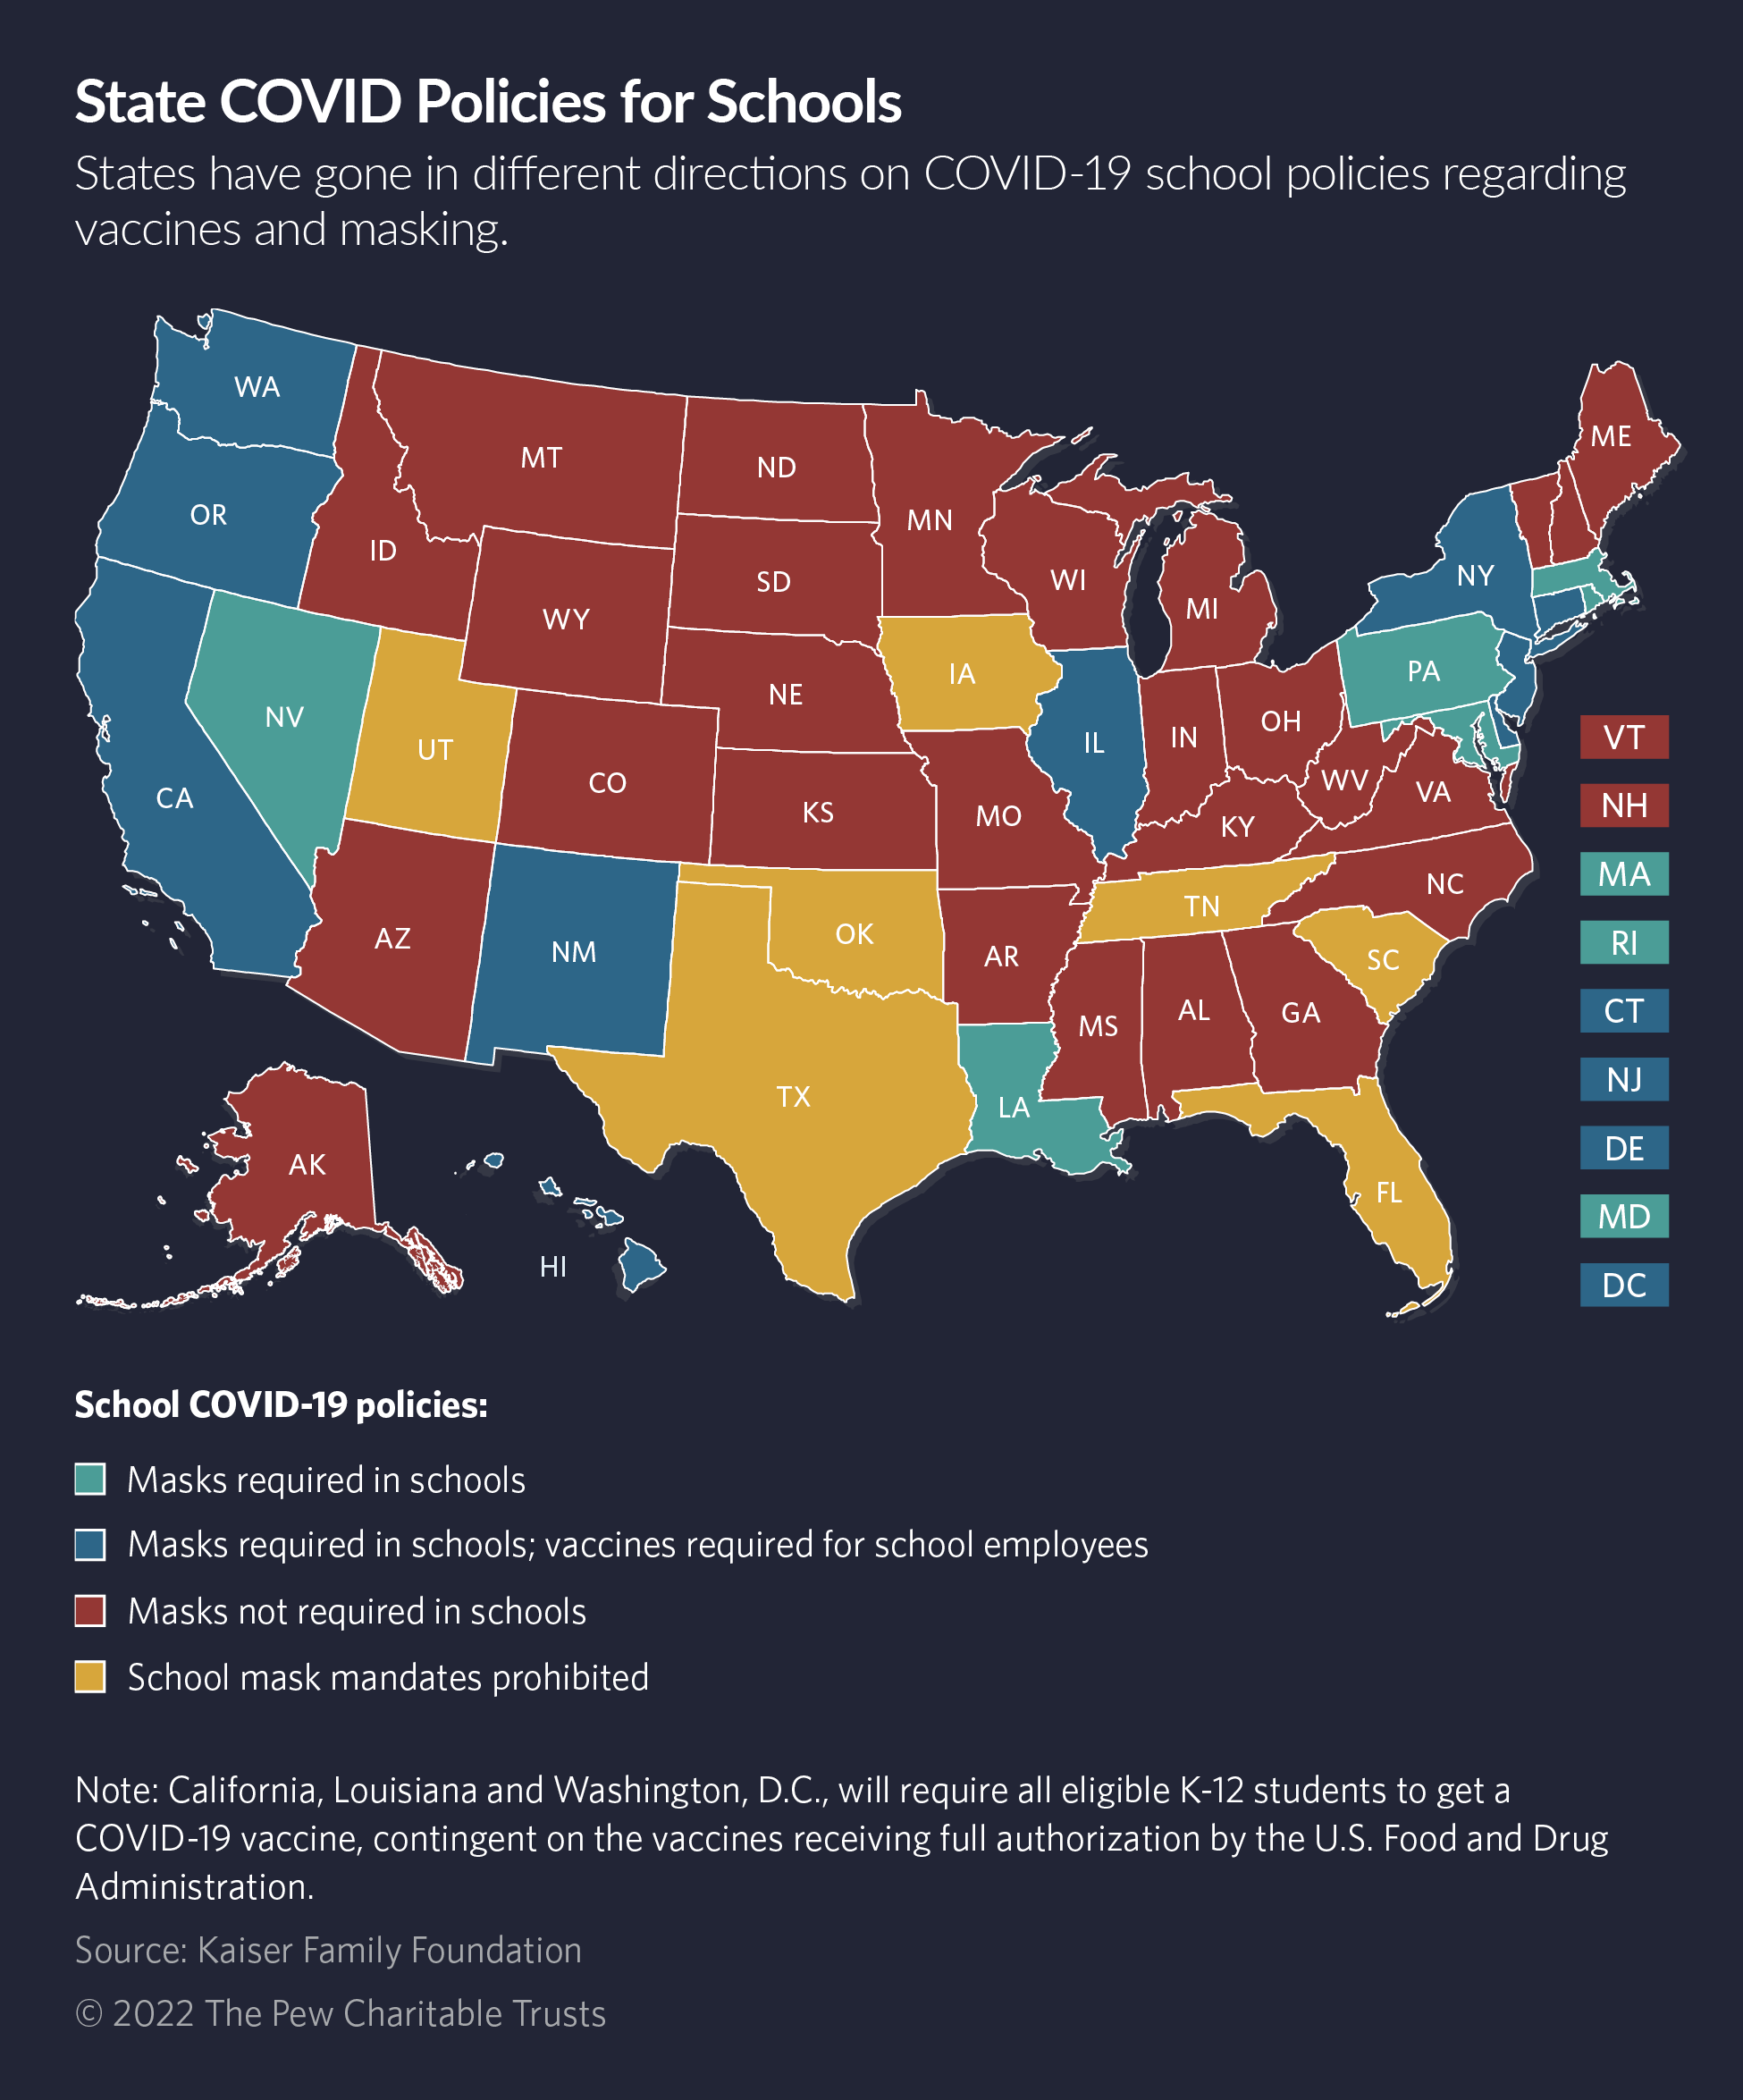 US map of state COVID policies for schools detailing if masks are required in school, not required in schools, school masks mandates prohibited, or masks required in schools; vaccines required for school employees.